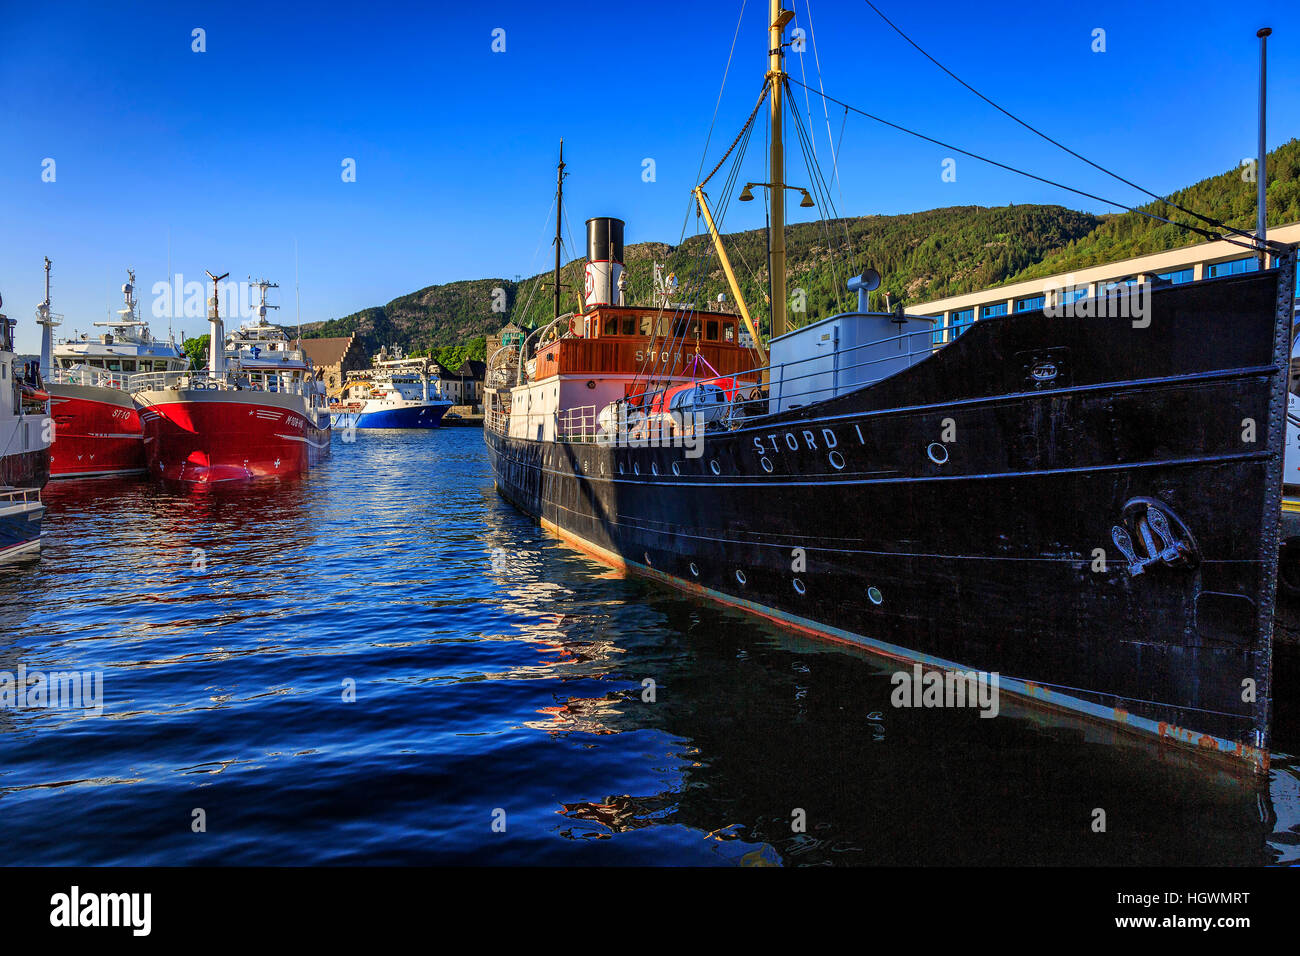 Old ships on display in Bergen, Norway Stock Photo